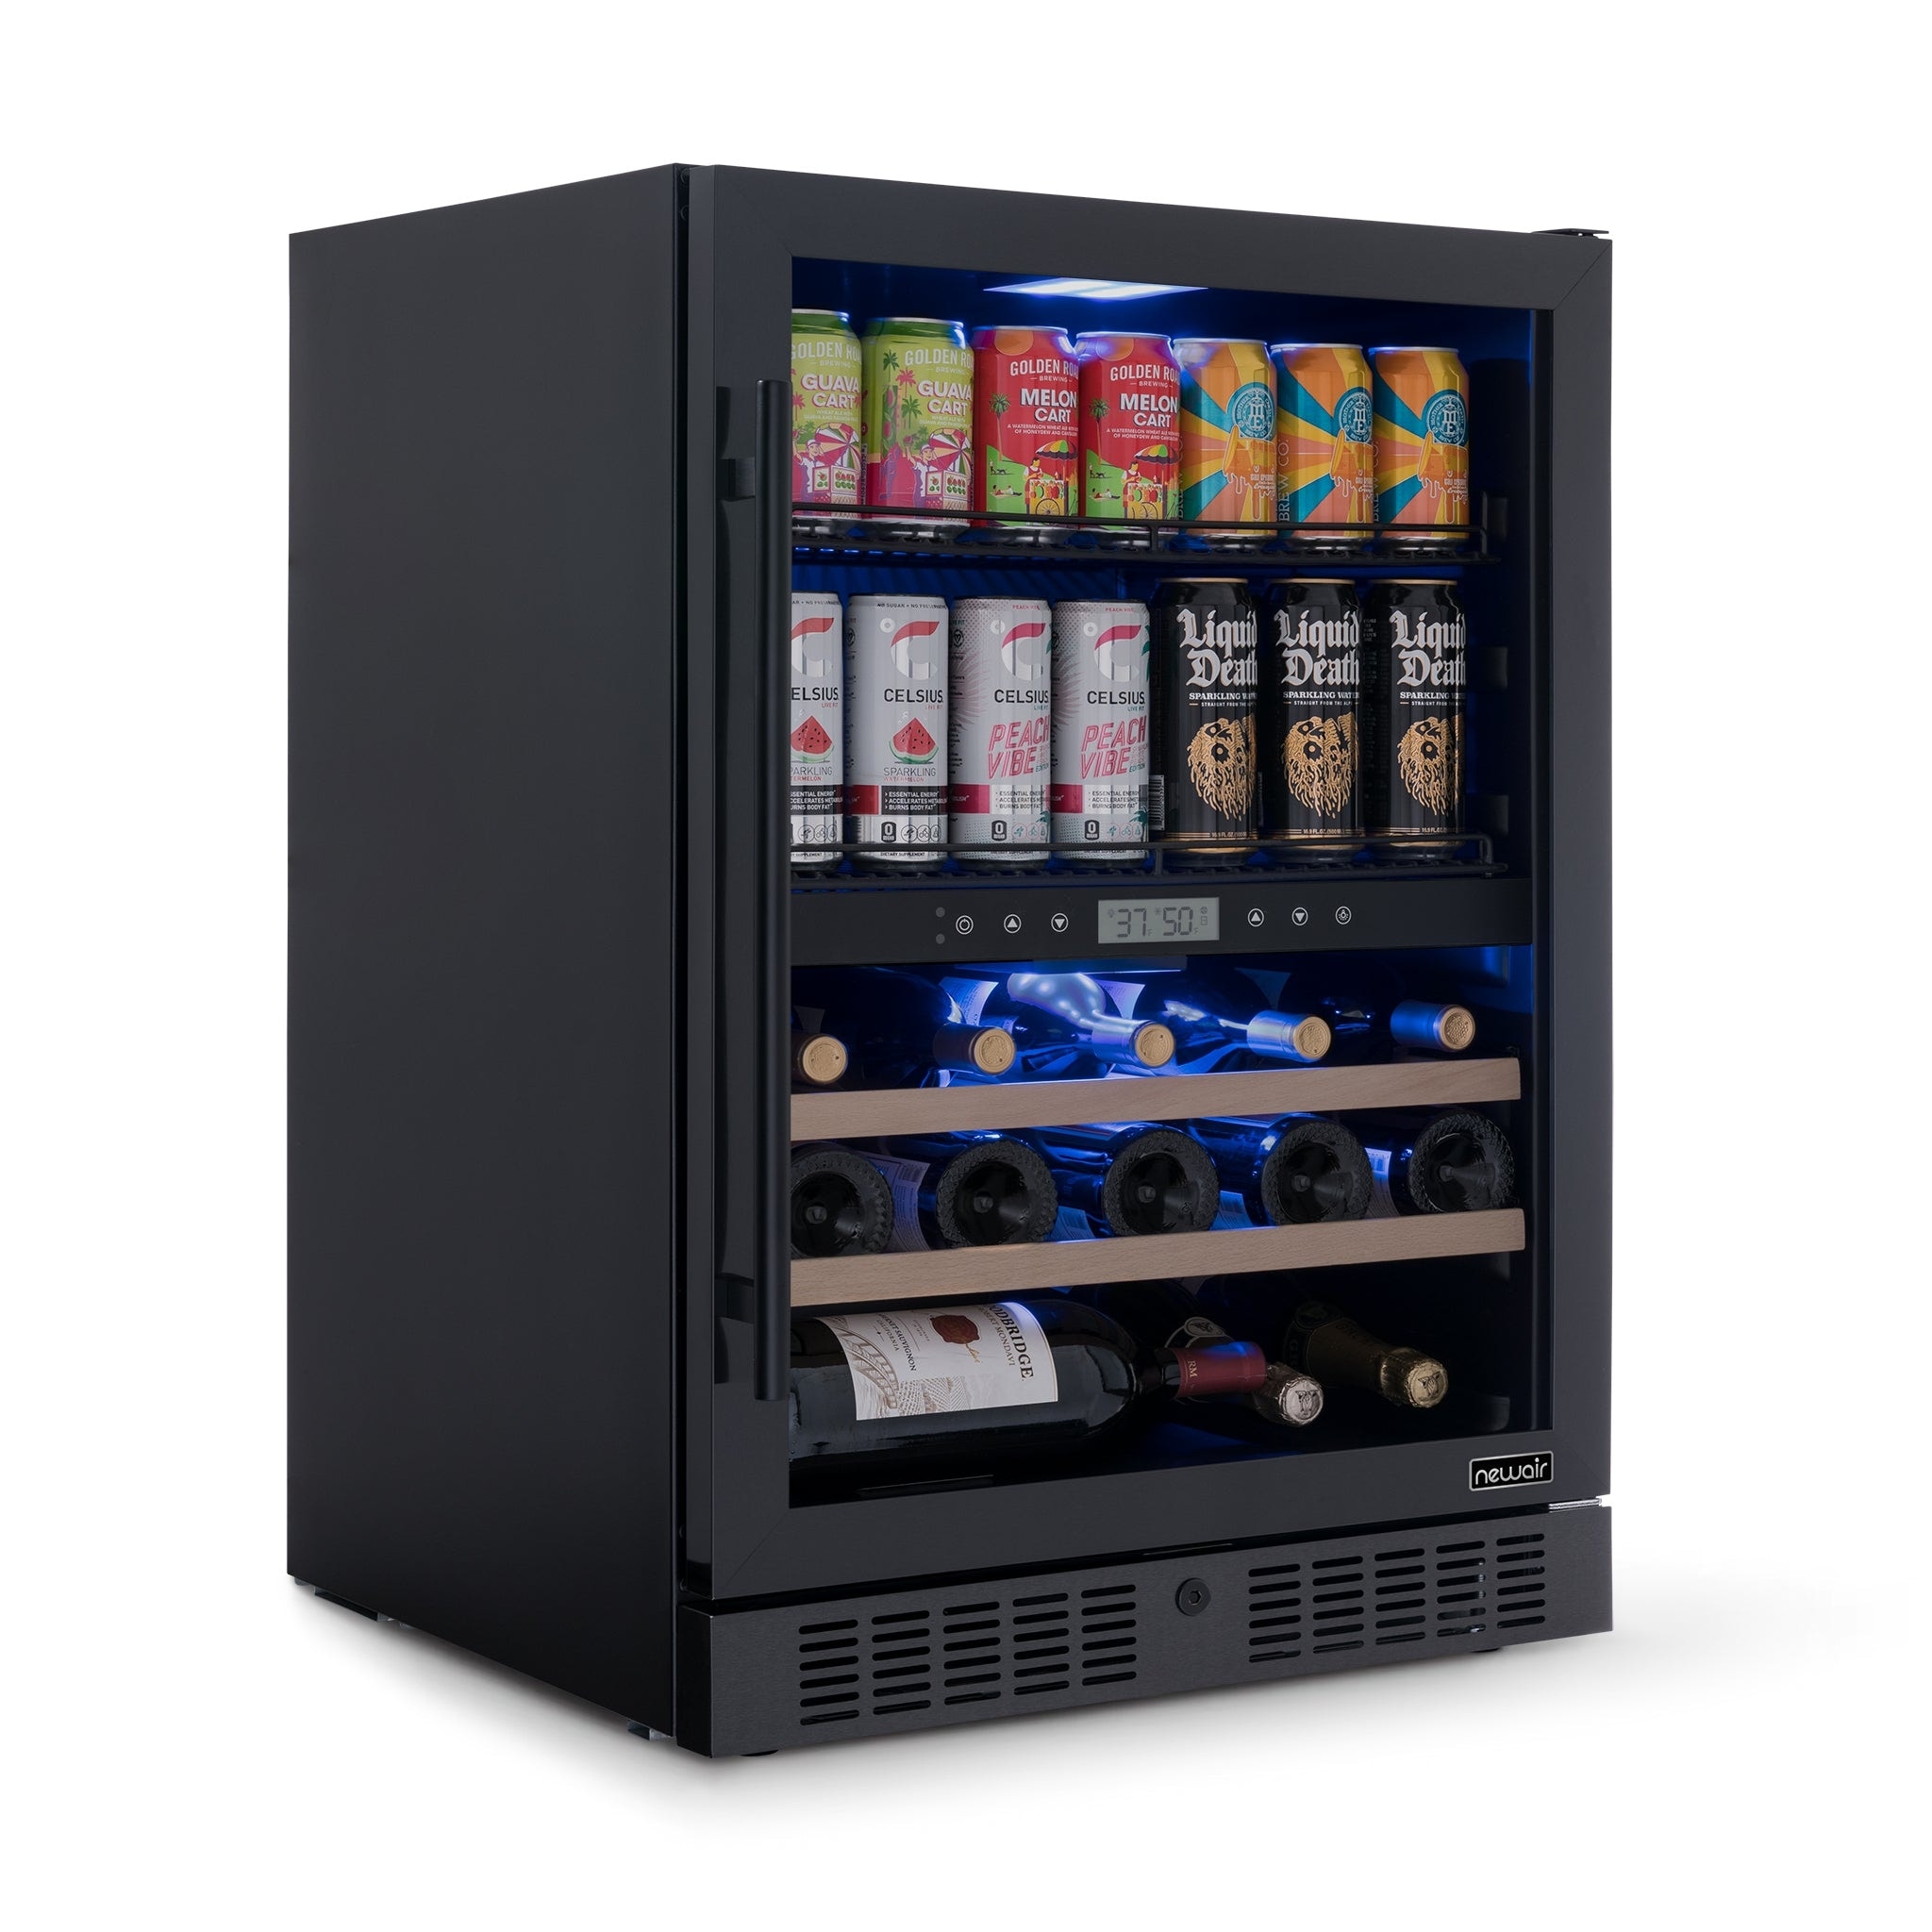 https://ak1.ostkcdn.com/images/products/is/images/direct/7ac0458d844e21fa2eab4578fbd3942395a7253b/Newair-Wine-and-Beverage-Splitshelf-Refrigerator%2C-24-Bottles-and-100-Cans%2C-Splitshelf-Built-in-Counter-or-Freestanding-Fridge.jpg